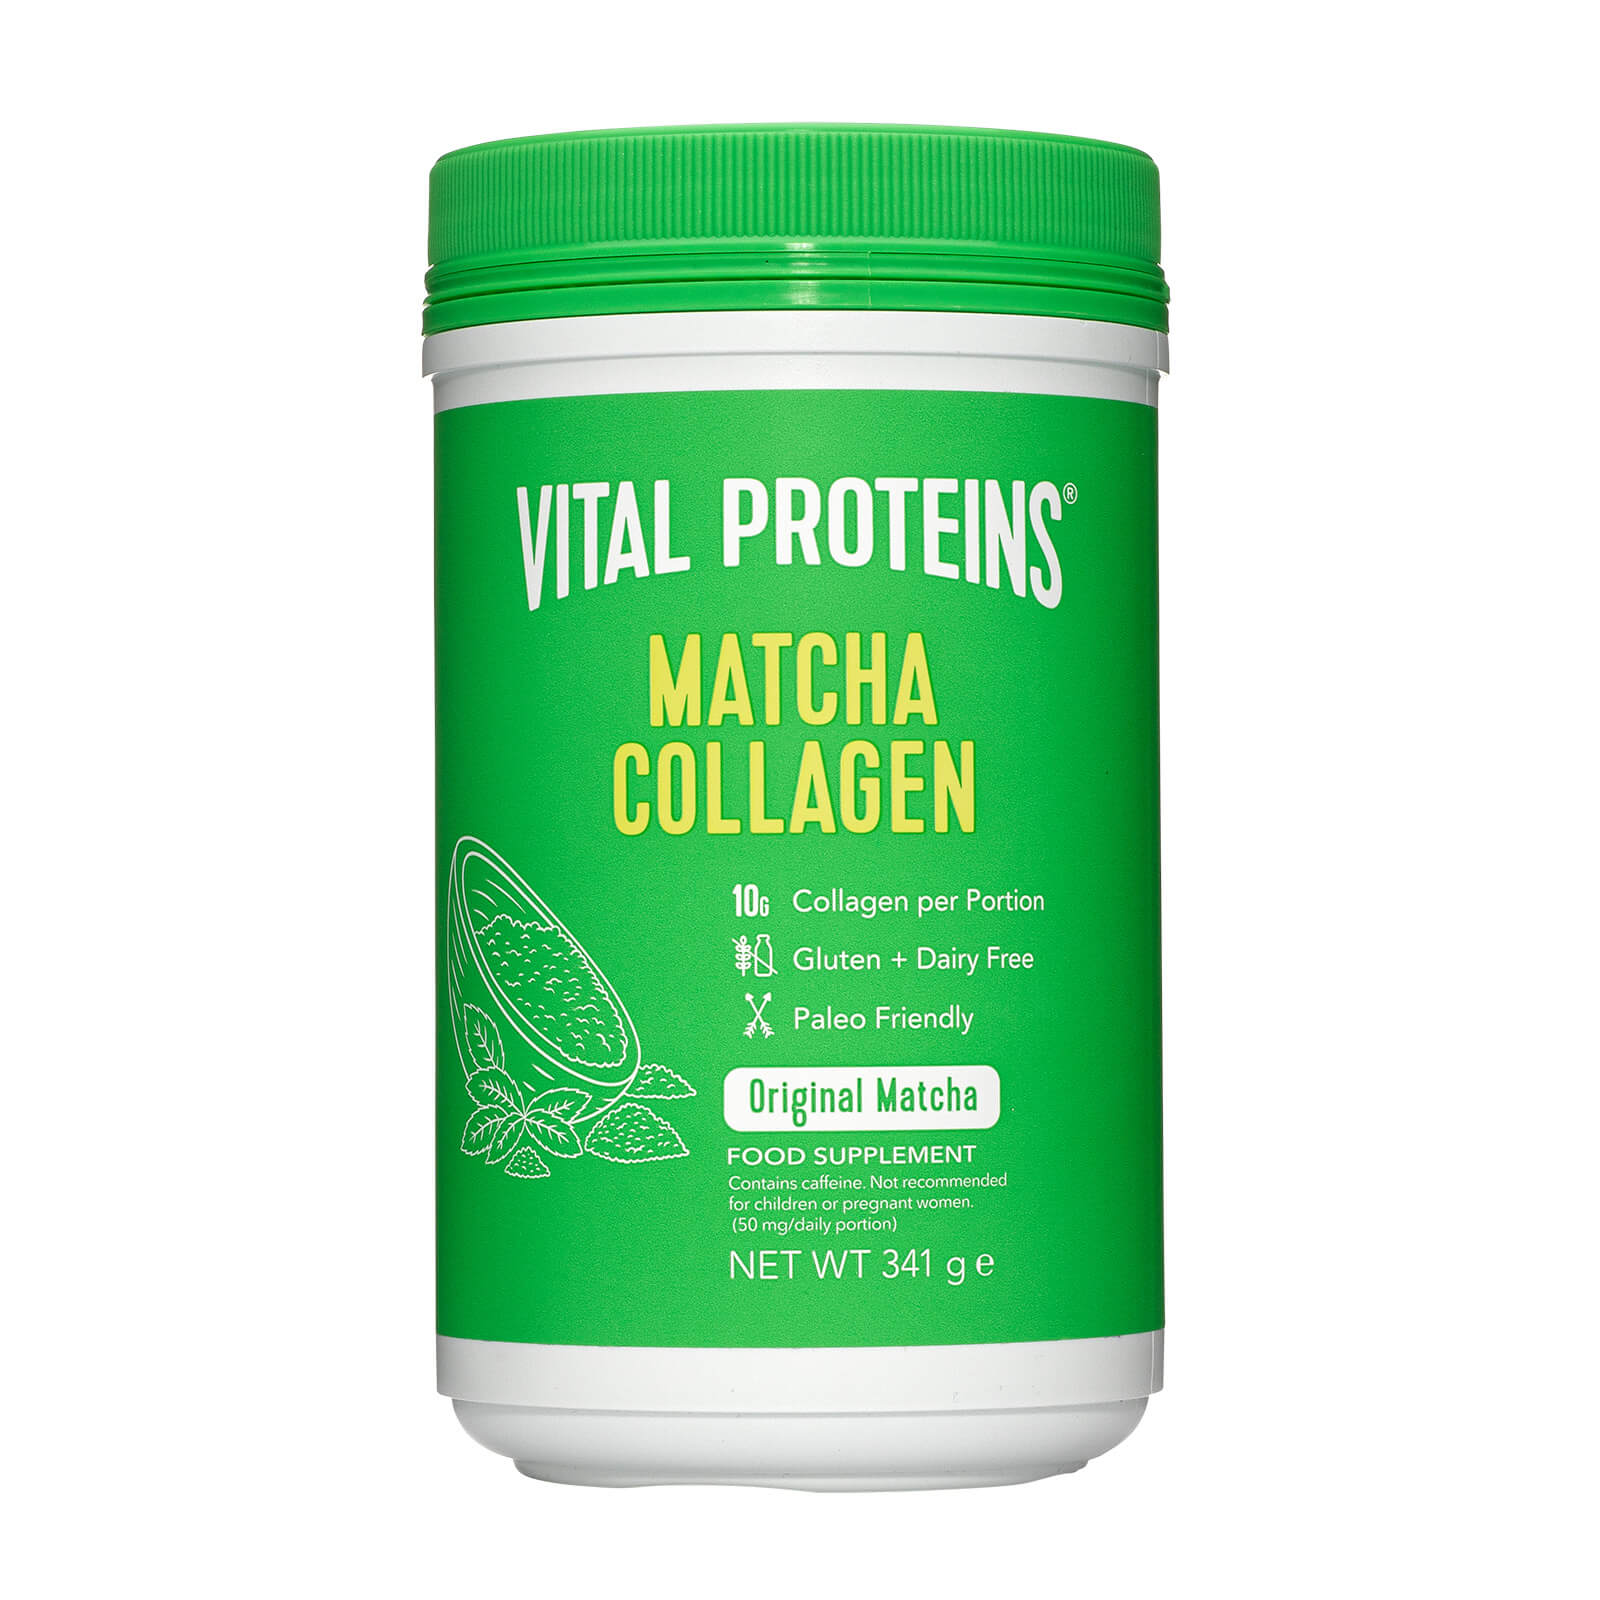 Matcha Collagen - 12oz Subscription - Delivery Every 2 Months